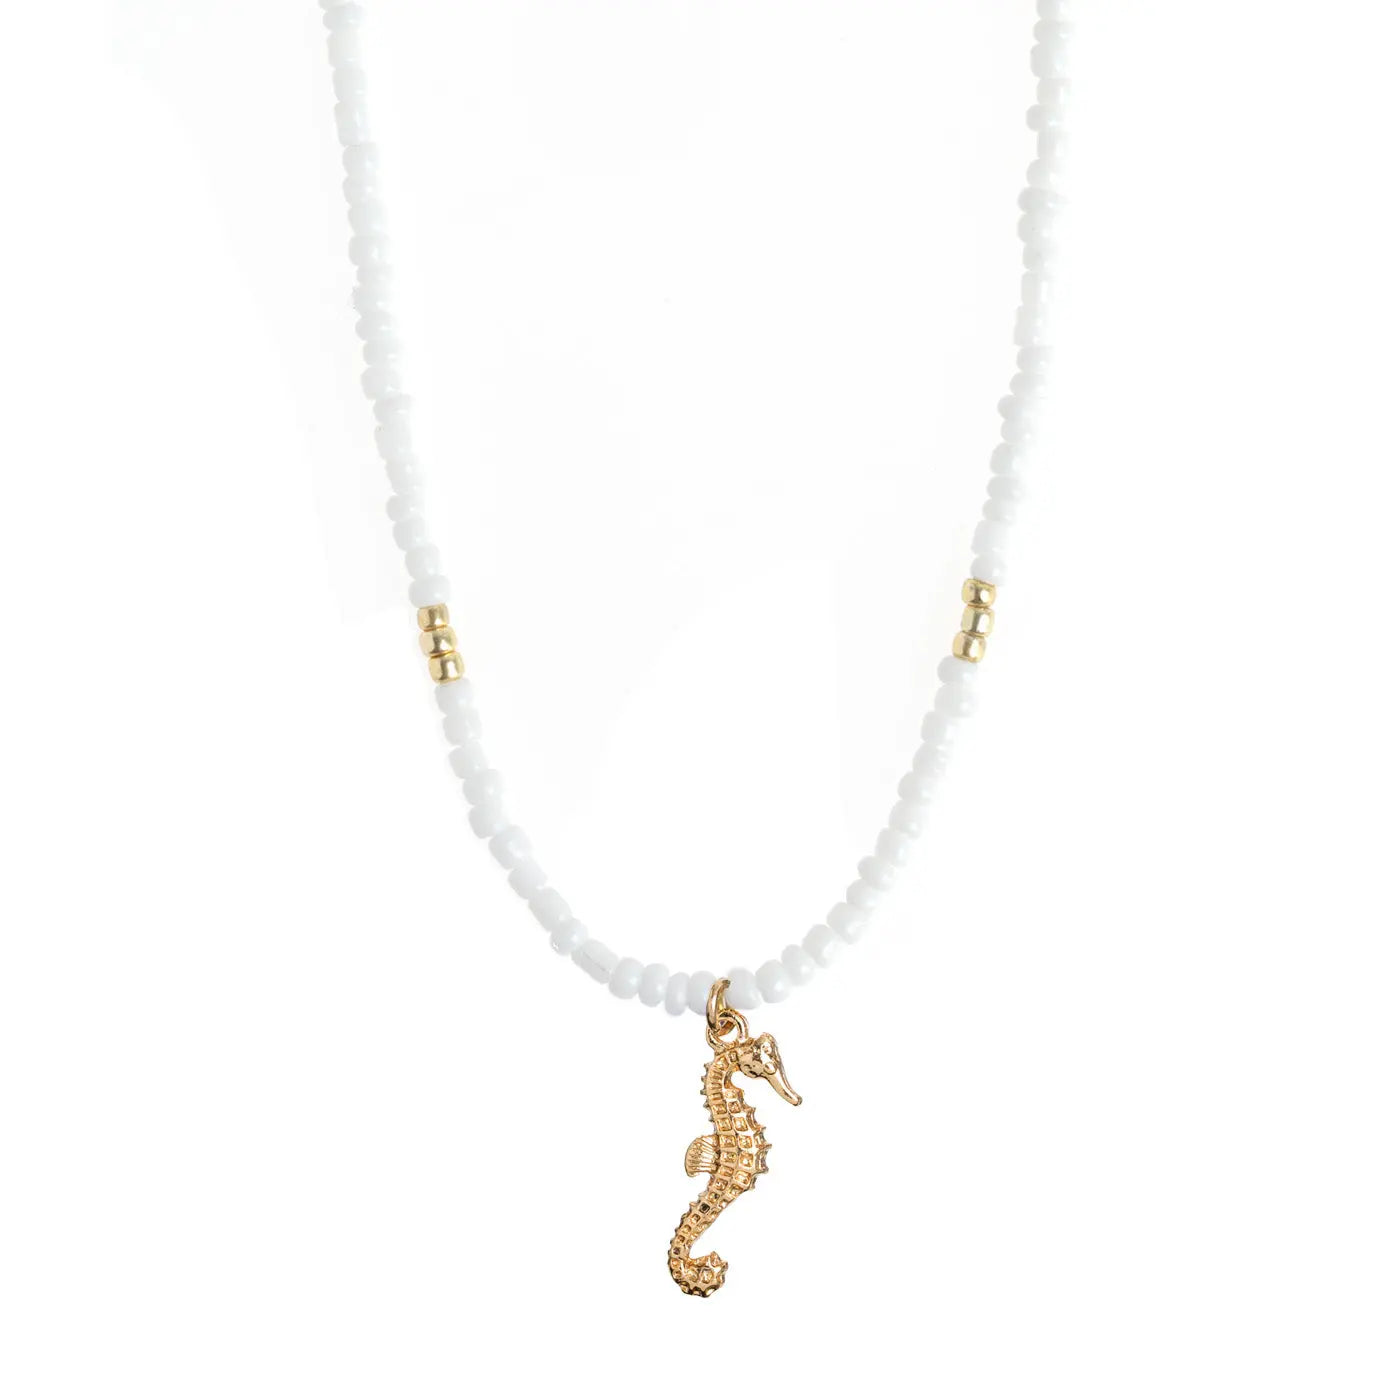 Ellie - Seahorse White Beads Necklace